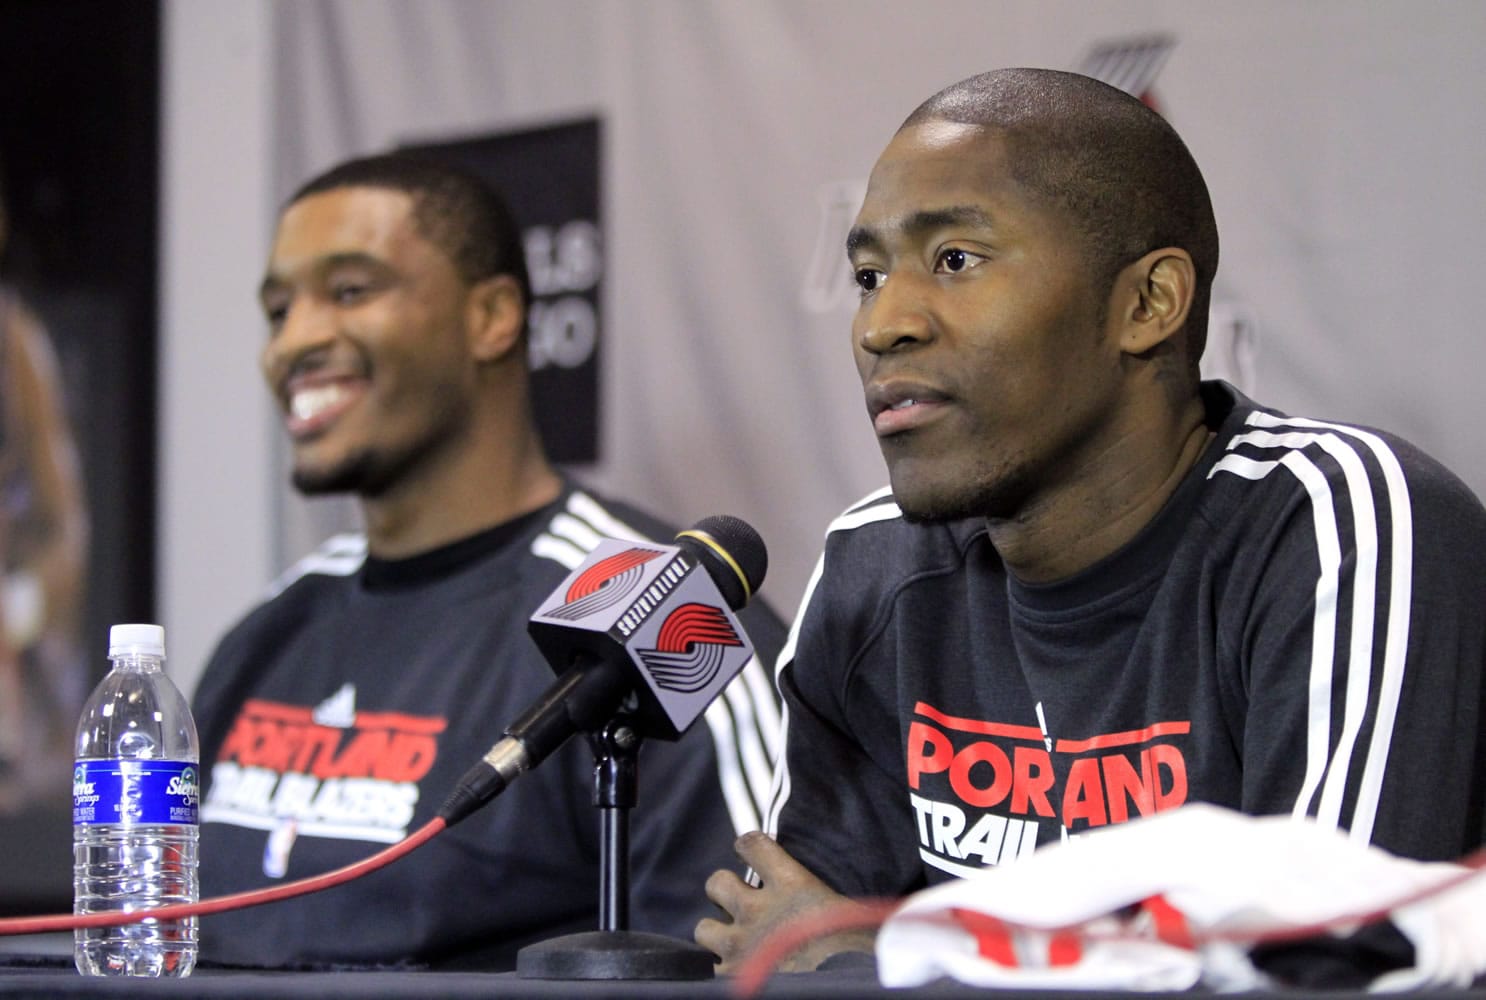 Free agents Jamal Crawford, right, and Craig Smith, who signed with the Portland Trail Blazers, appear at a news conference in Portland on Friday.